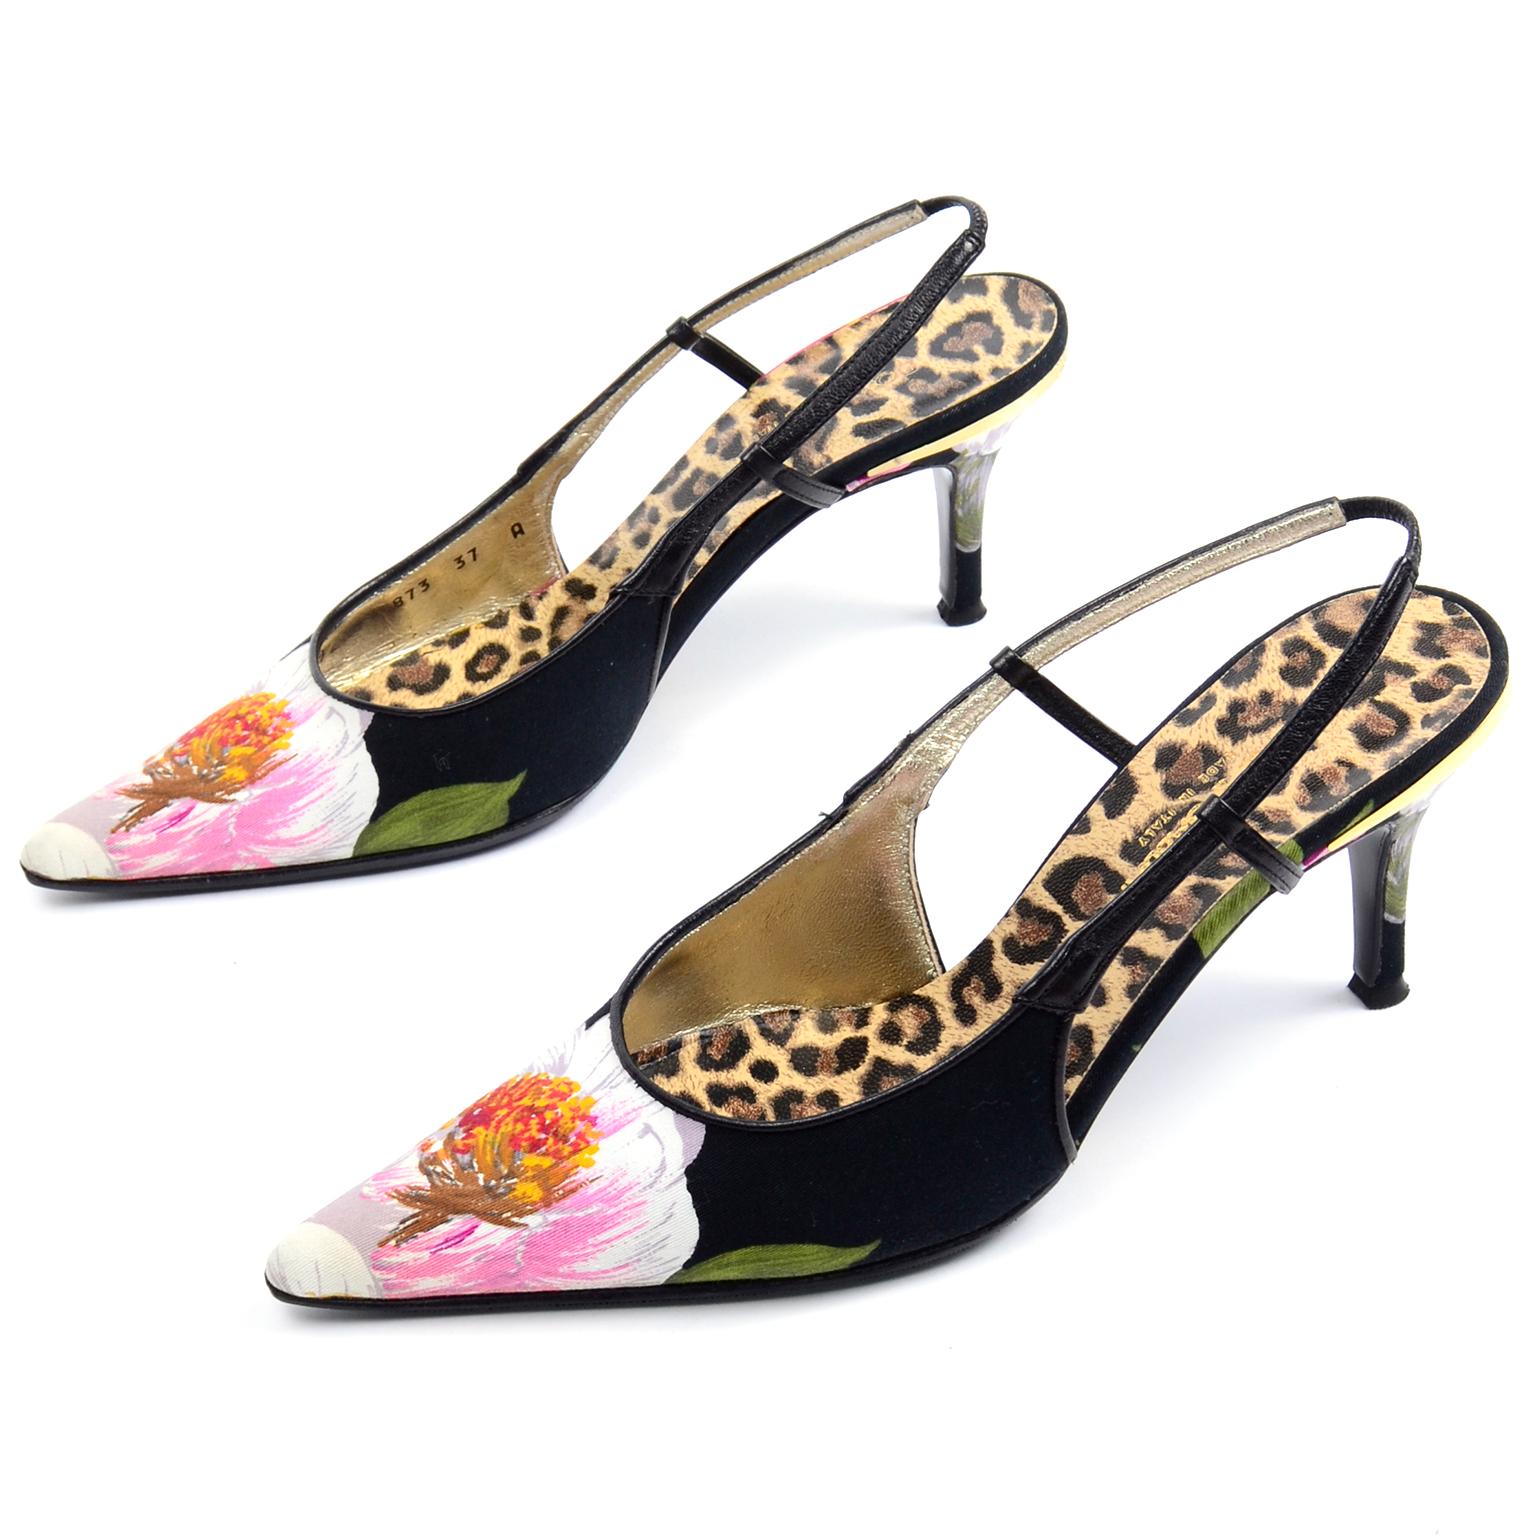 Beige Dolce & Gabbana Pink White & Floral Slingback Pointed Toe Shoes w/ Box & Dustbag For Sale